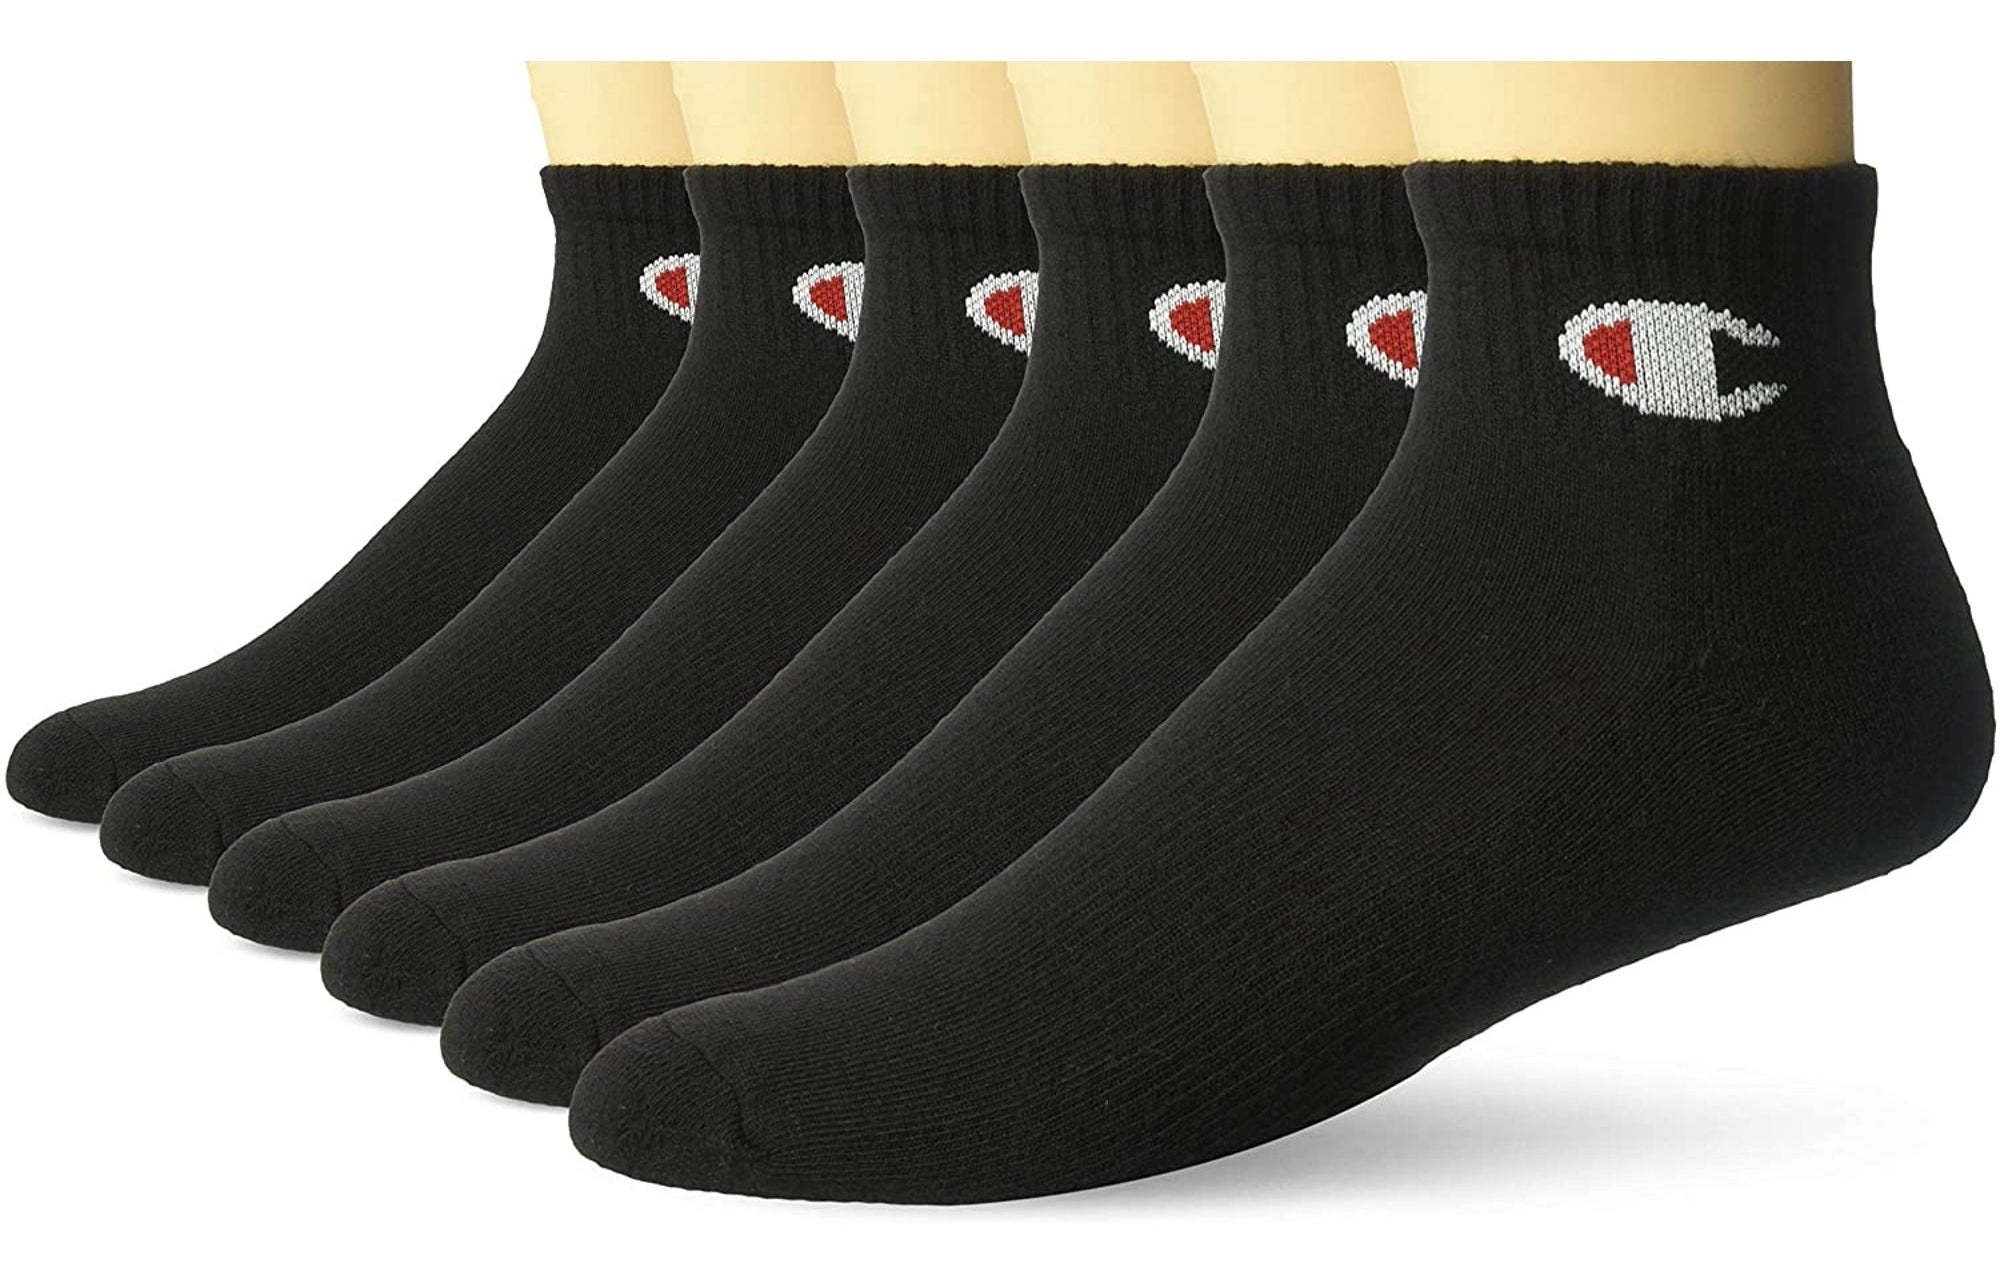 Six matching socks in a row